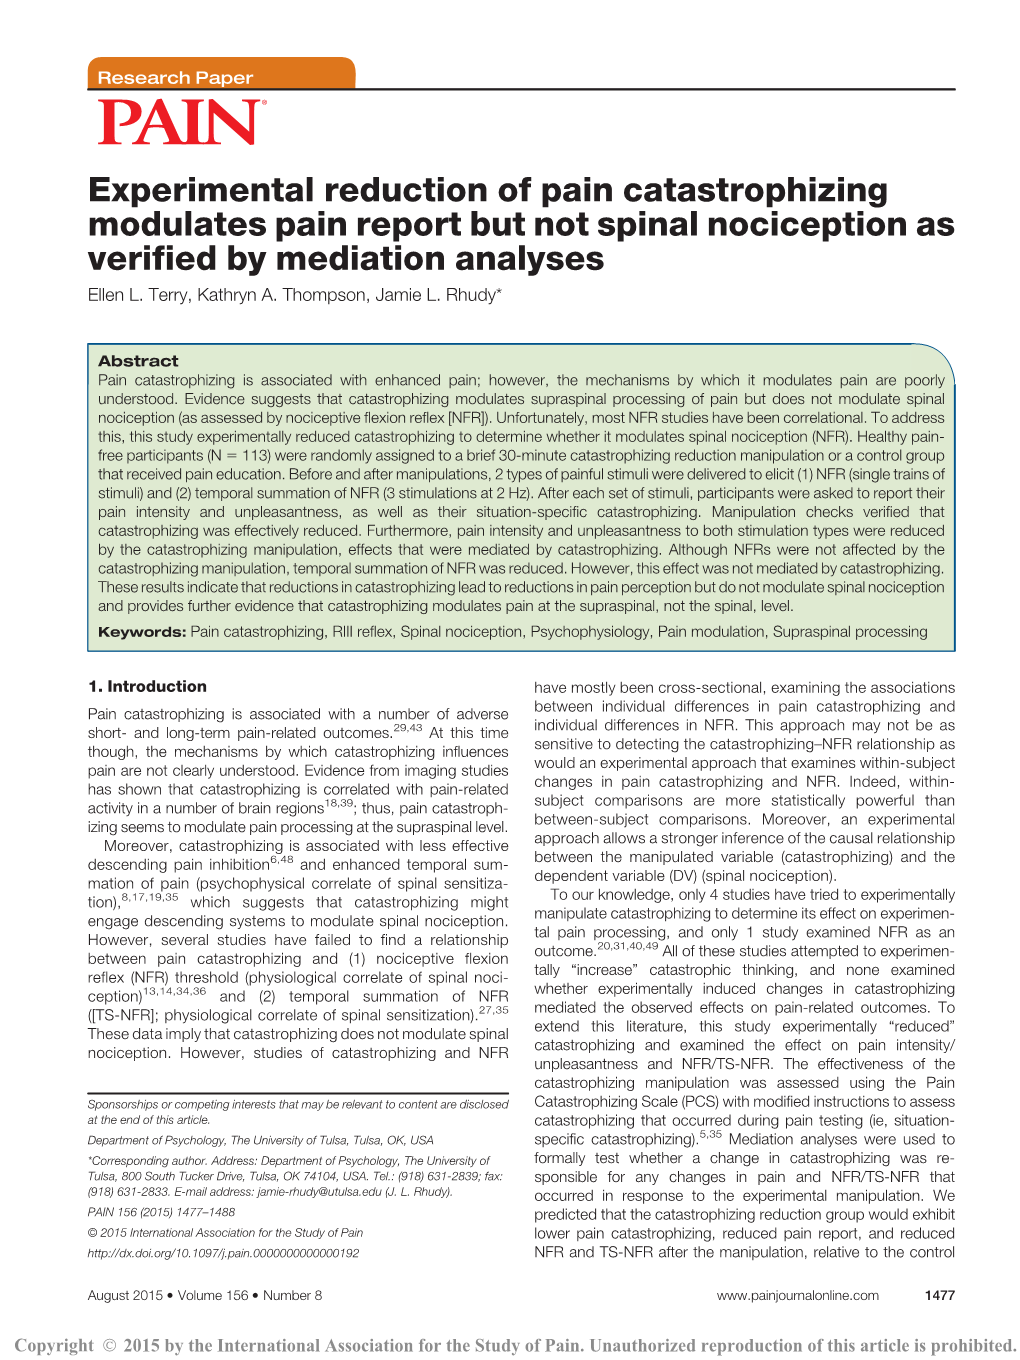 Experimental Reduction of Pain Catastrophizing Modulates Pain Report but Not Spinal Nociception As Verified by Mediation Analyses Ellen L